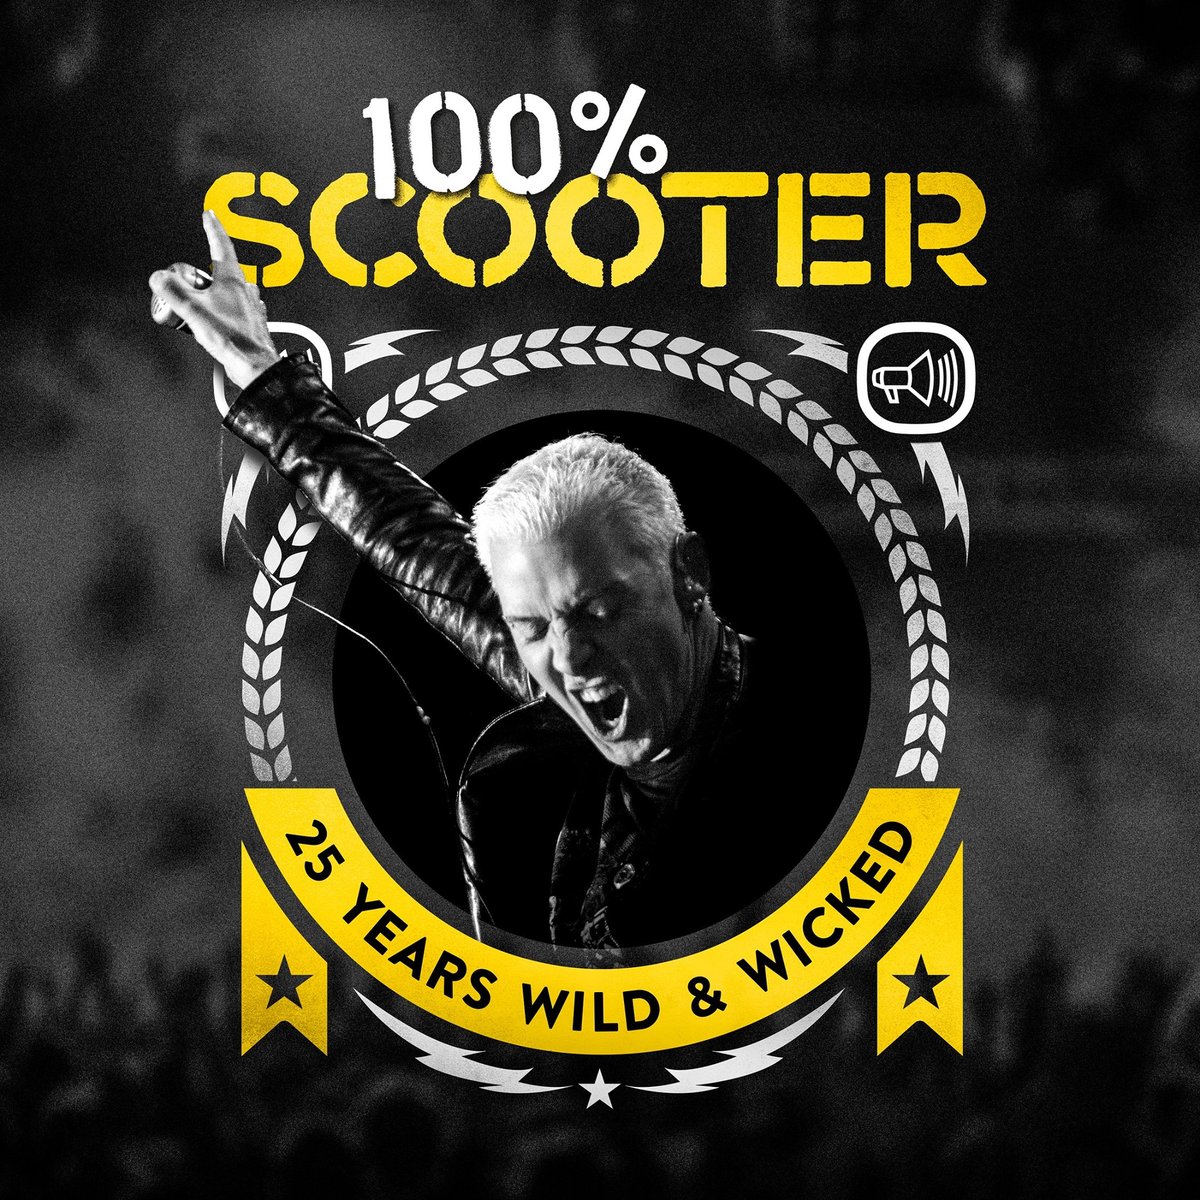 scooter__100procent_scooter_(25_years_wild_and_wicked)